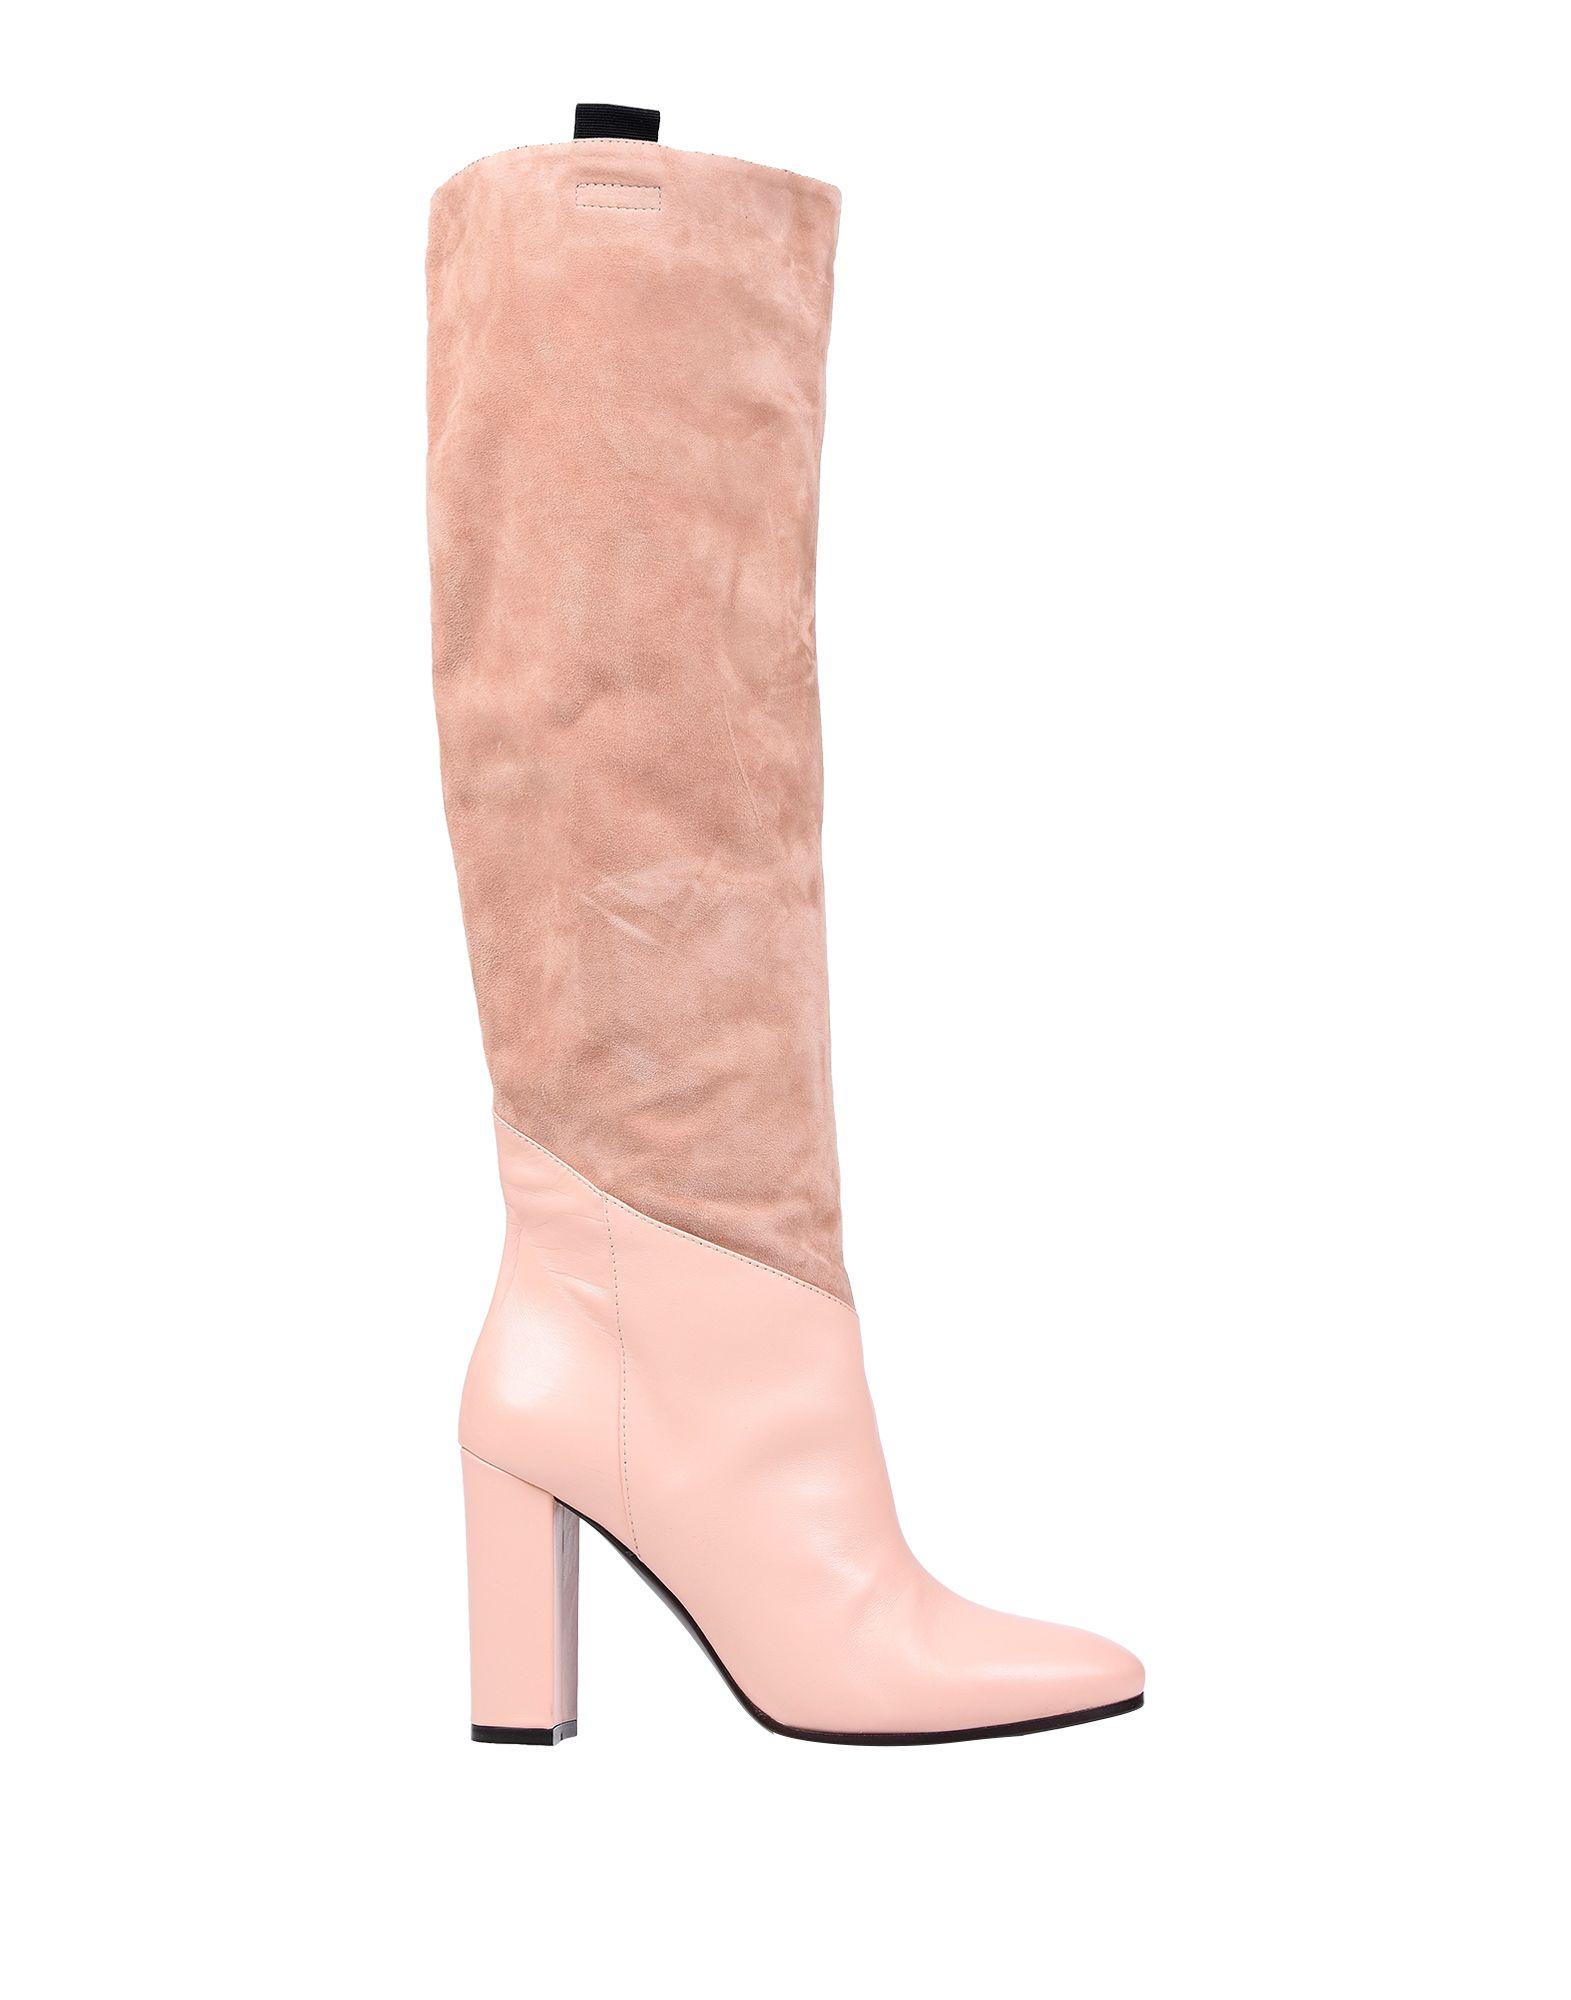 pale pink knee high boots